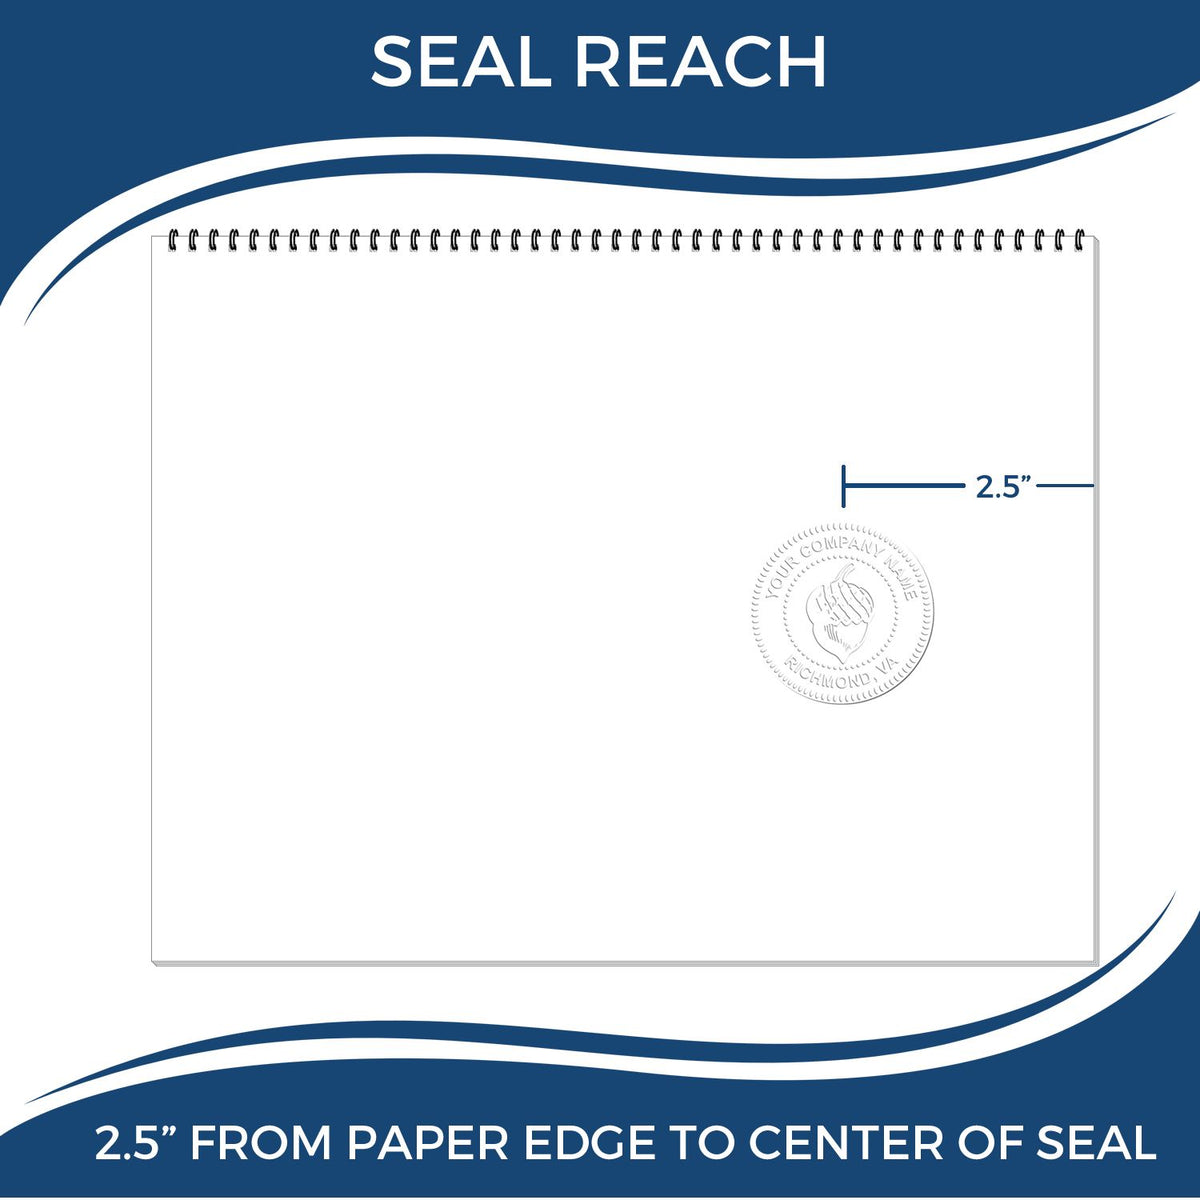 An infographic showing the seal reach which is represented by a ruler and a miniature seal image of the Heavy Duty Cast Iron Guam Land Surveyor Seal Embosser